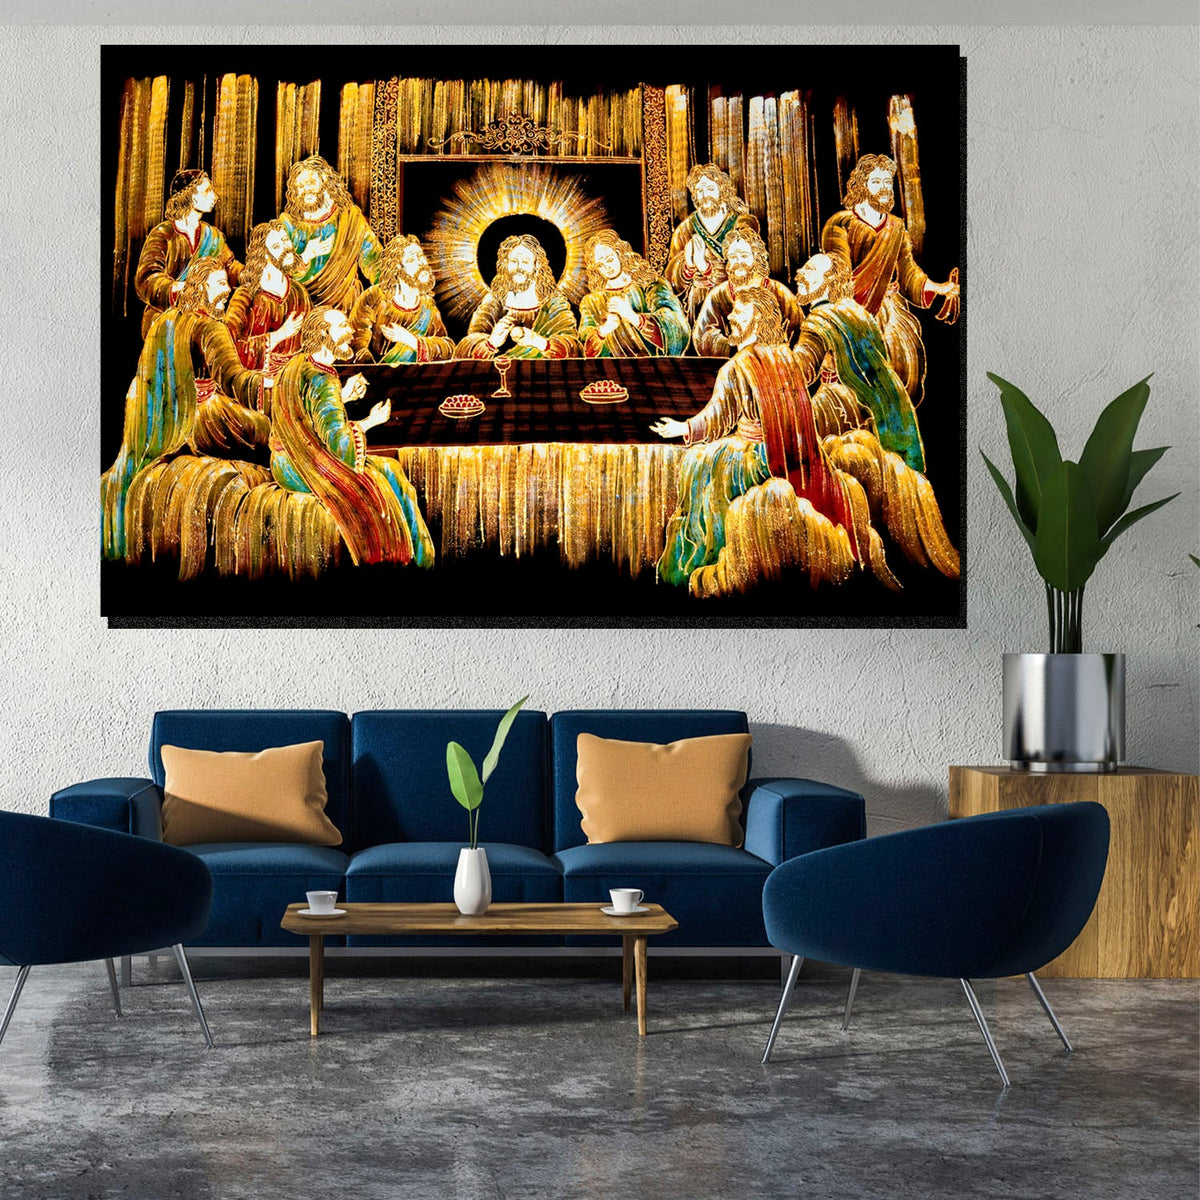 https://cdn.shopify.com/s/files/1/0387/9986/8044/products/TheLastSupperDepictionCanvasArtprintStretched-4.jpg